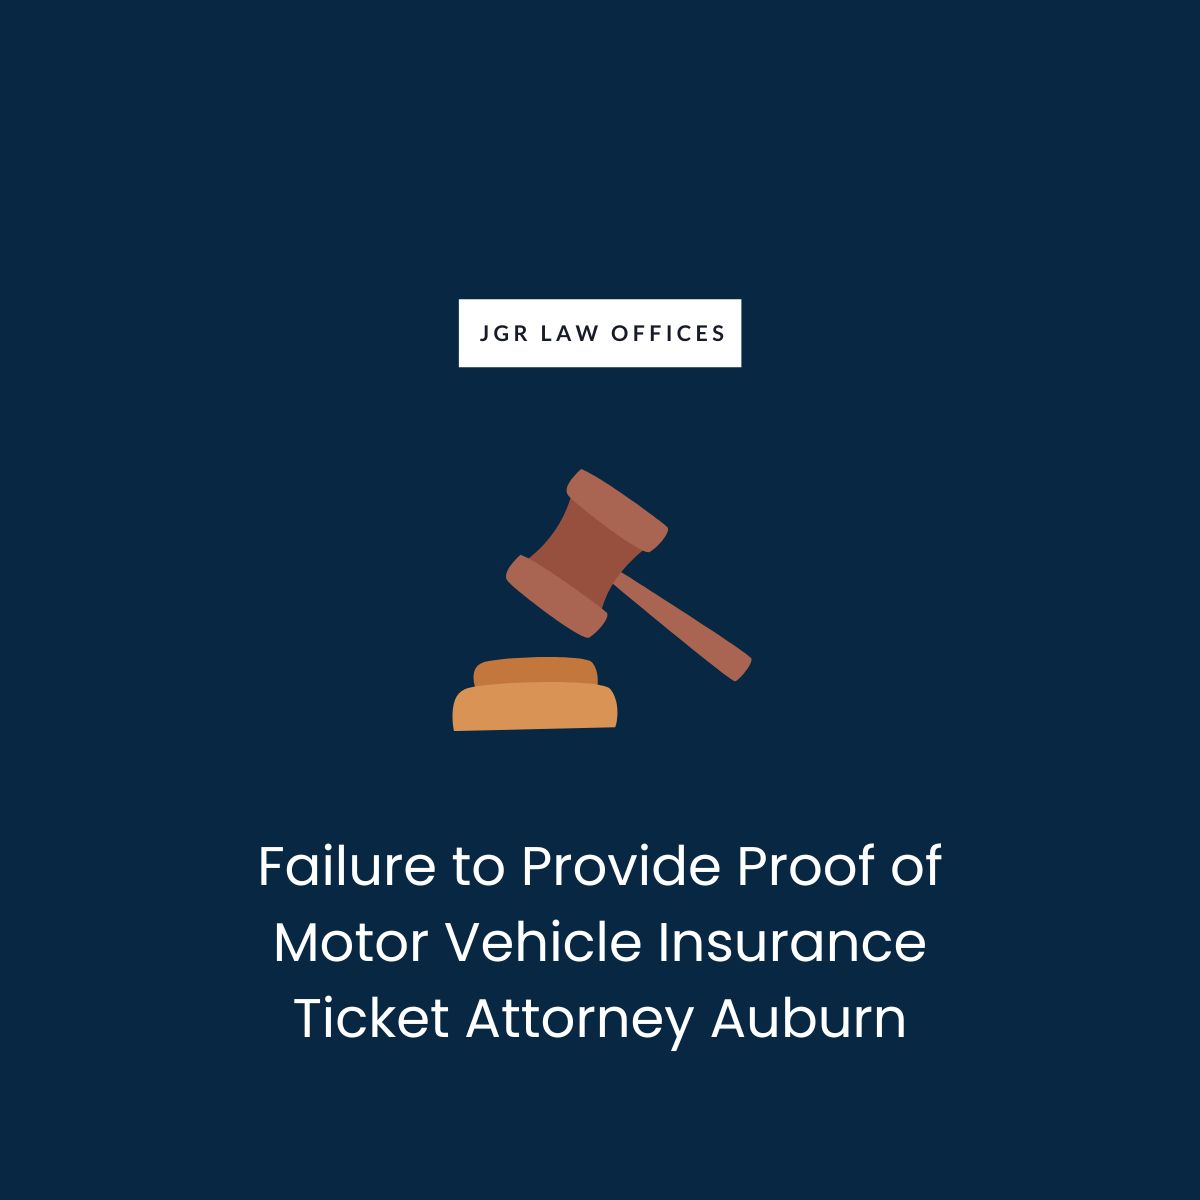 Failure to Provide Proof of Motor Vehicle Insurance Ticket Attorney Auburn